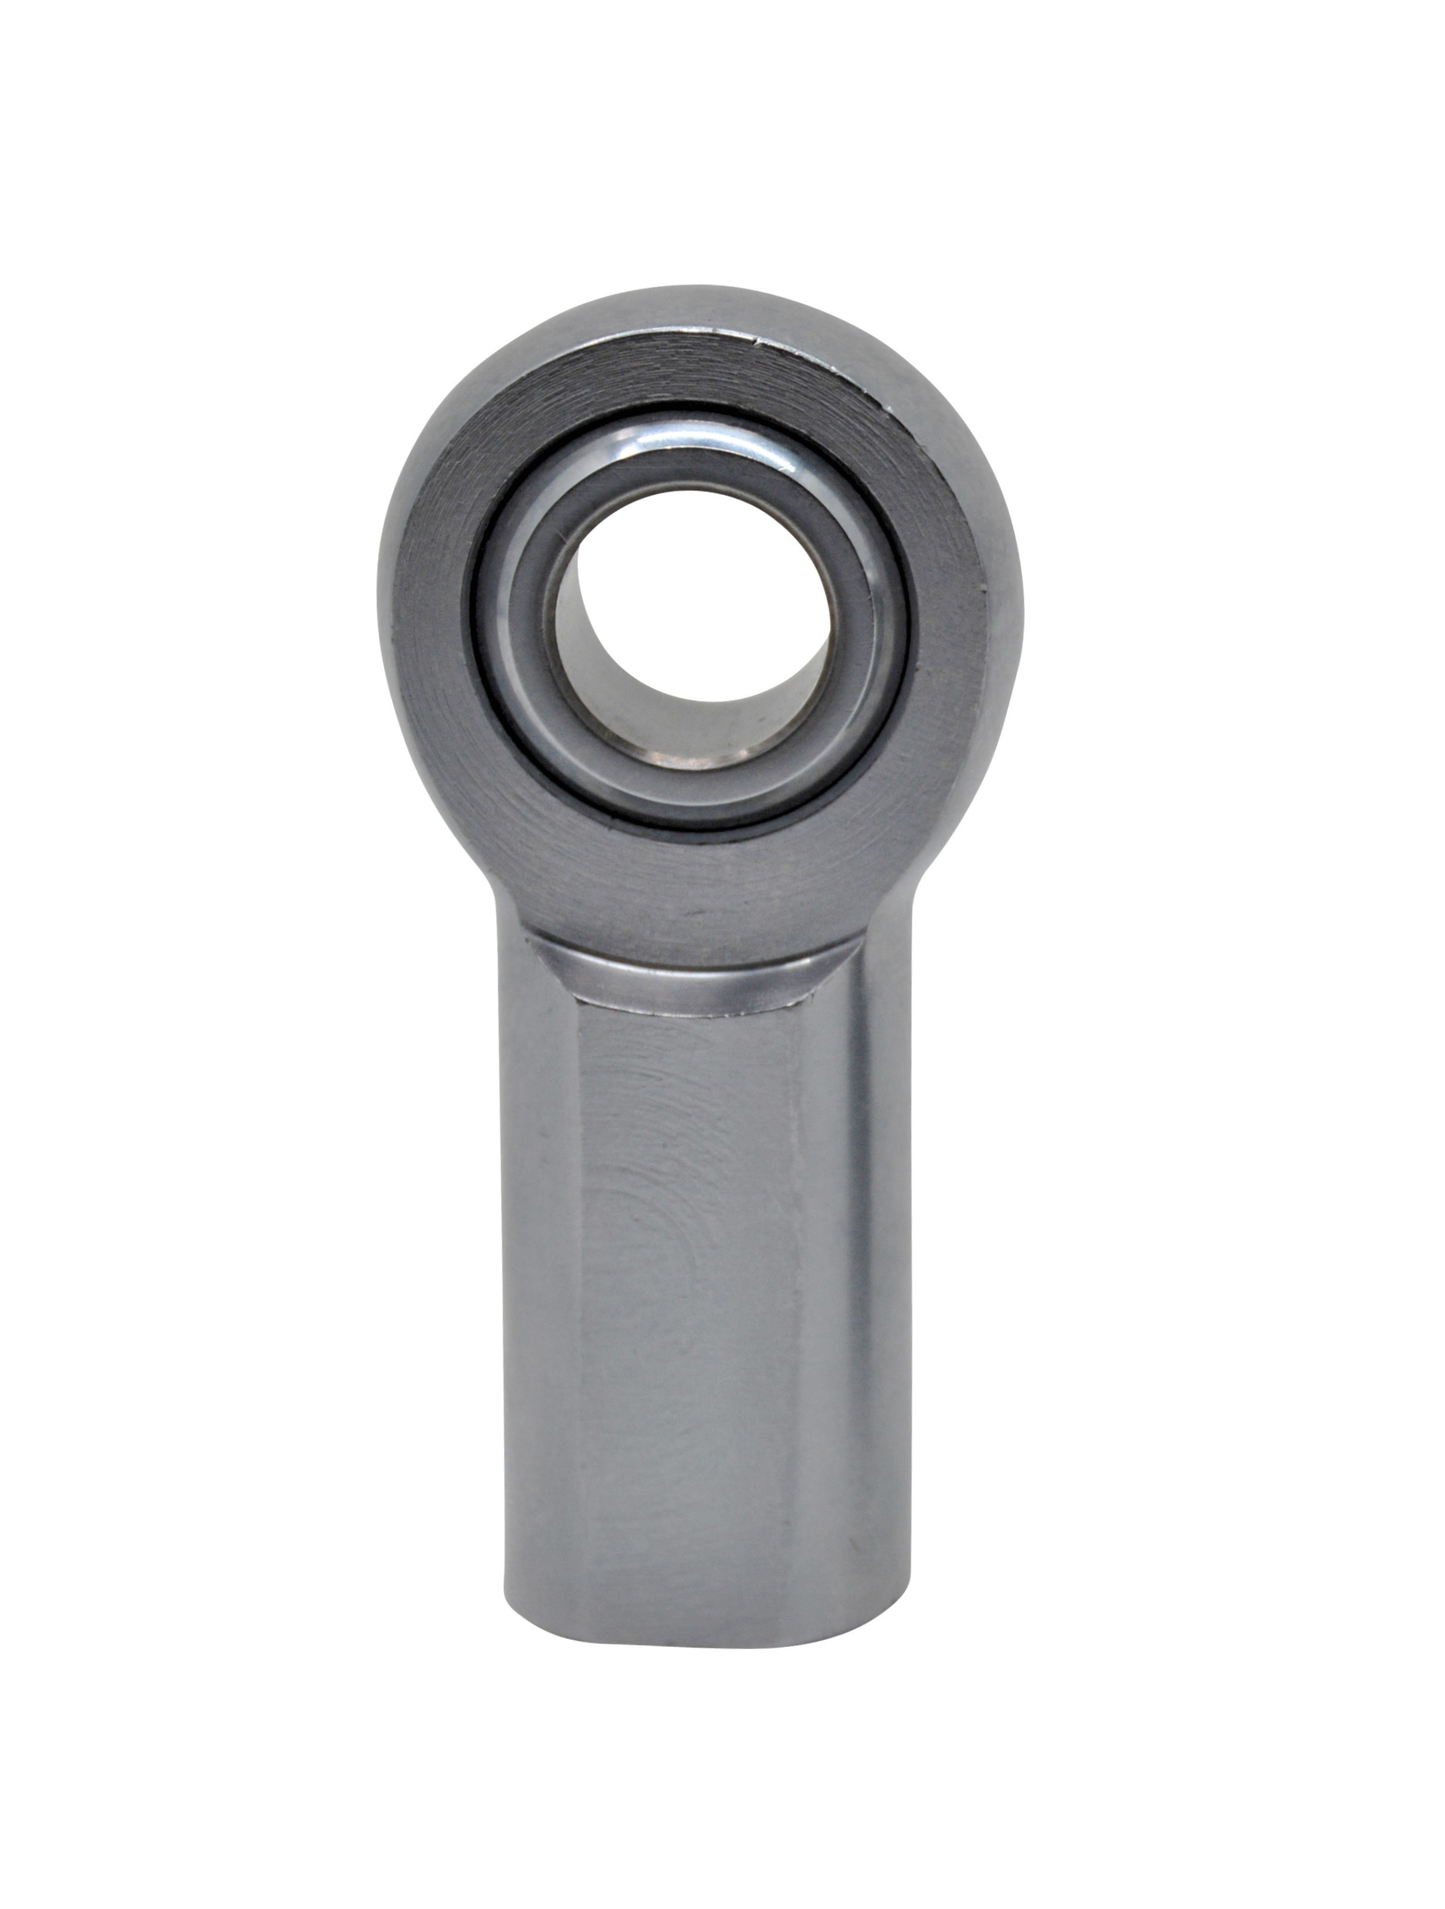 5/8" Female heim joint Right-hand (normal) thread, Heavy duty